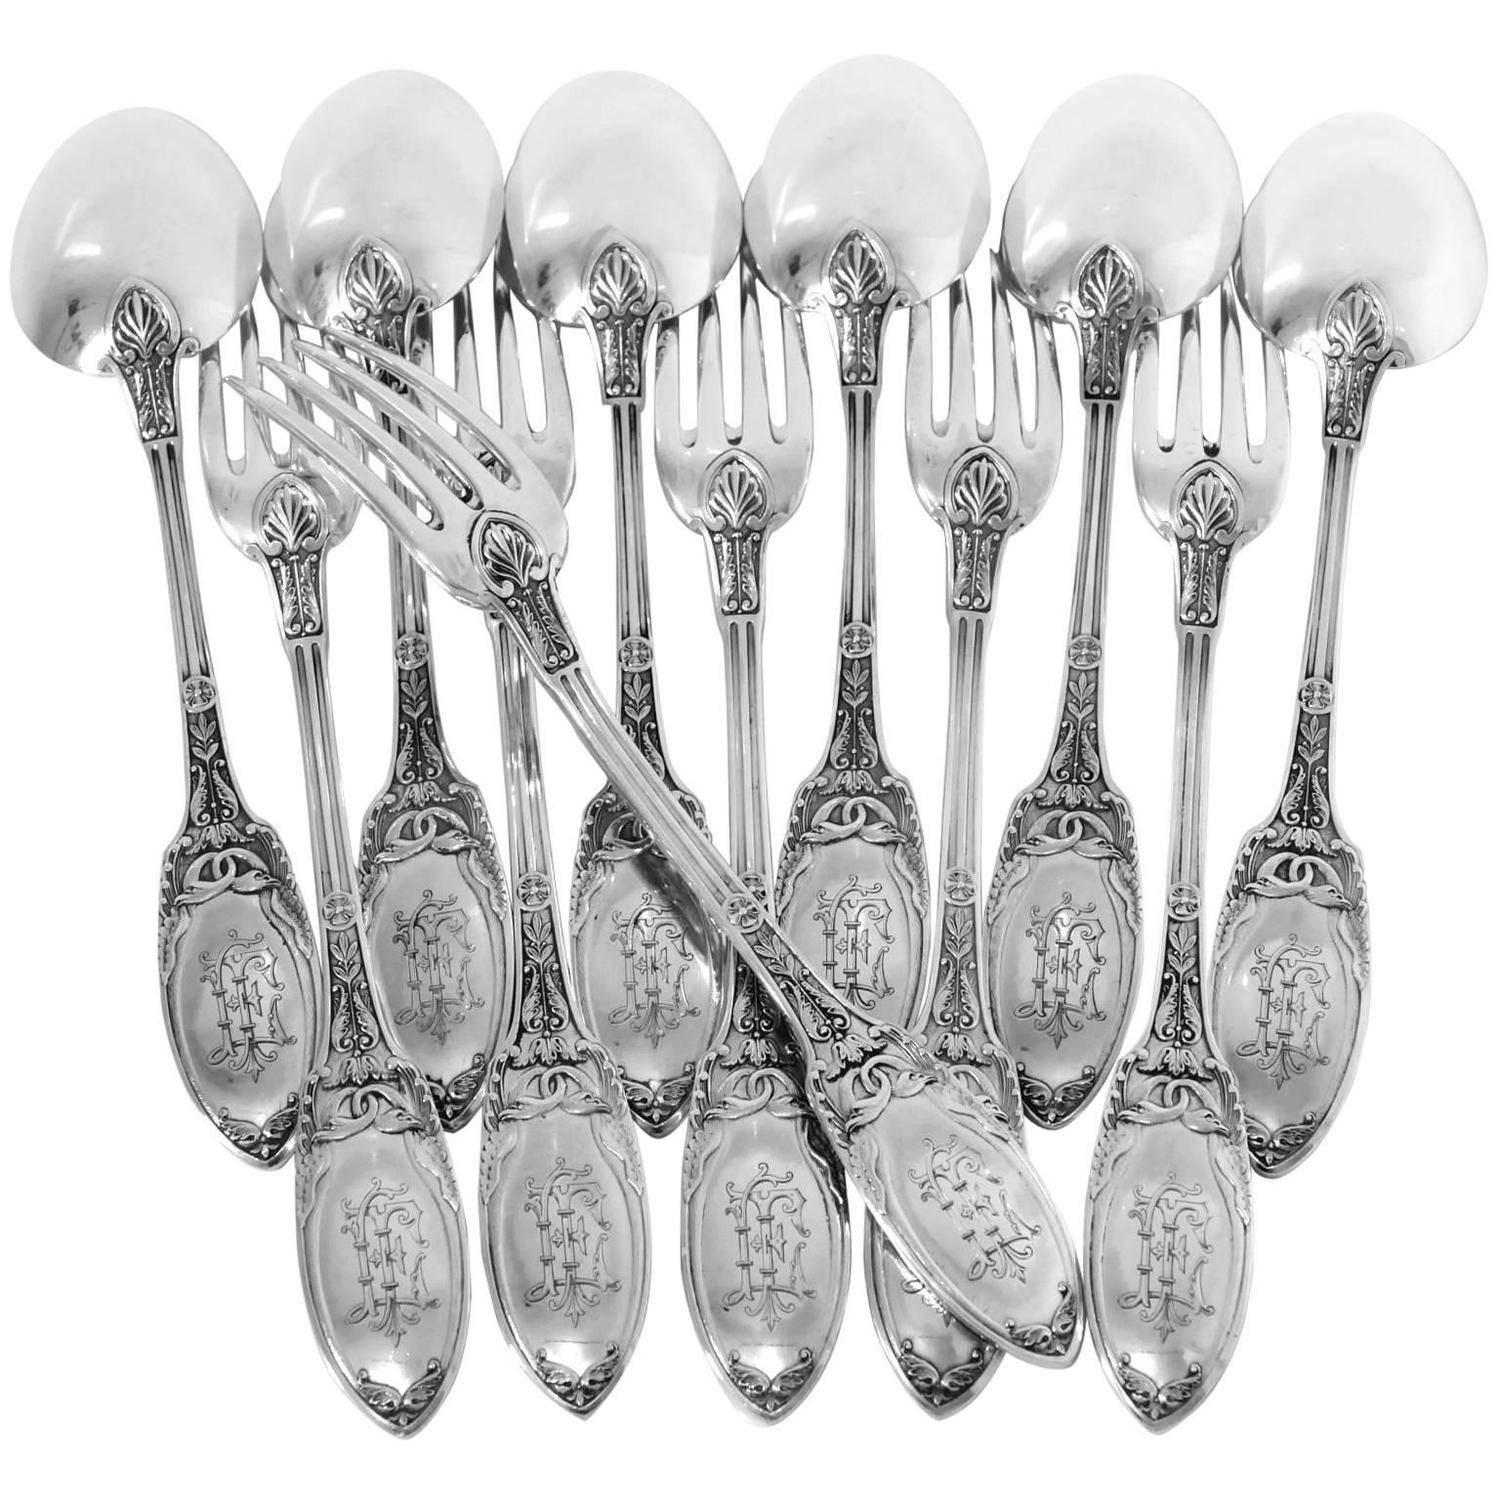 Combeau Rare French Sterling Silver Dinner Flatware Set 12 Piece Empire, Swans